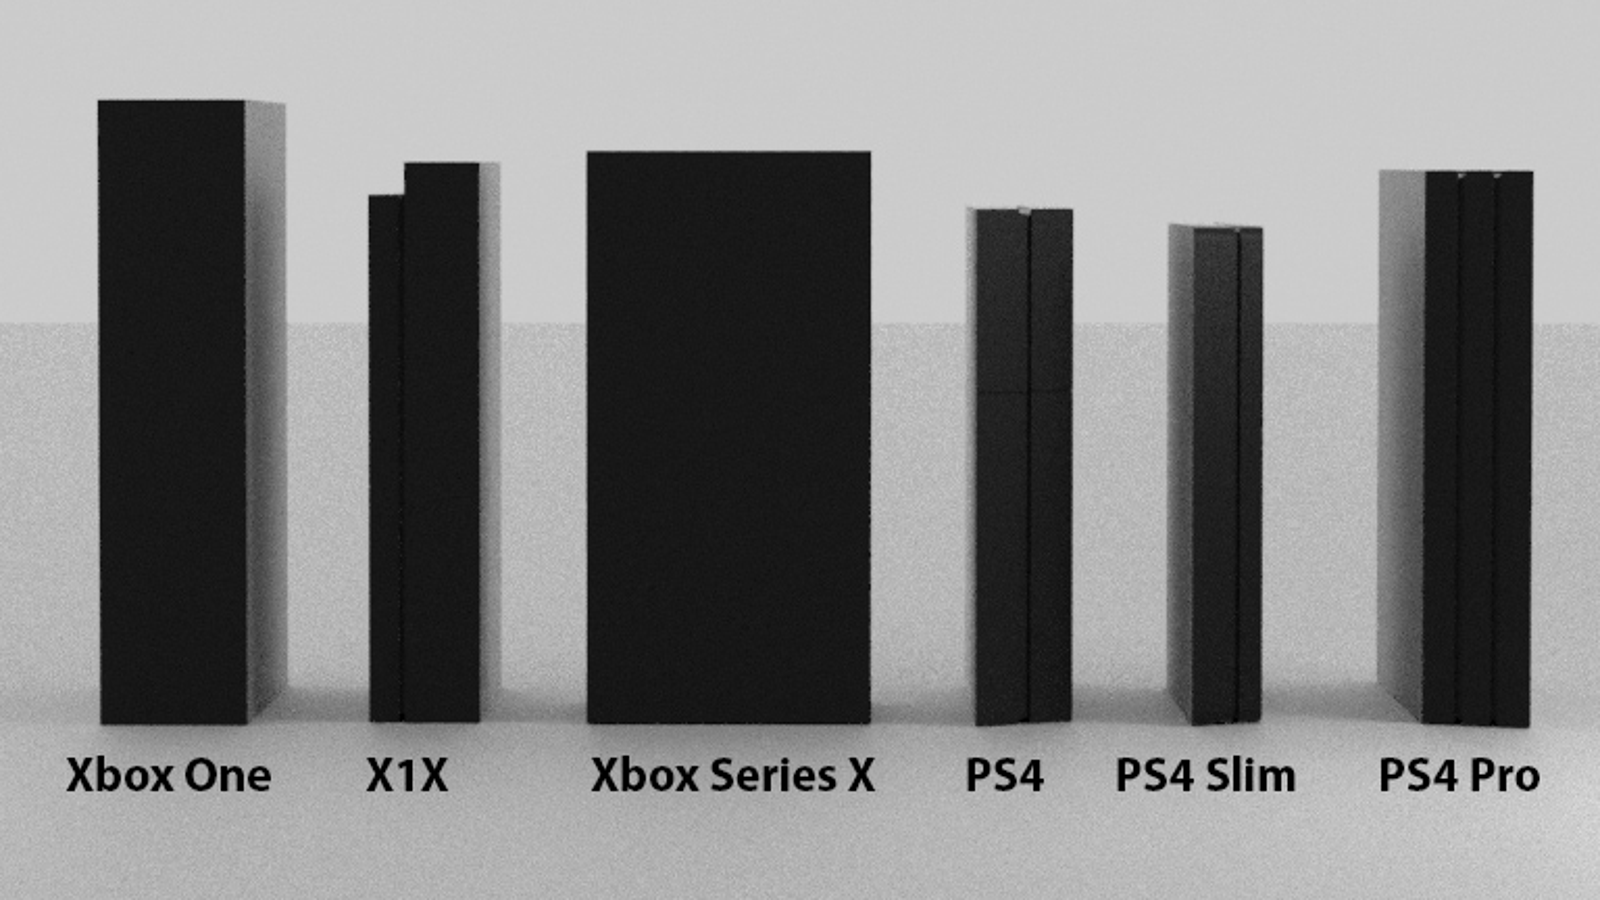 Xbox Series X comparison to Xbox One X: size, weight, and more